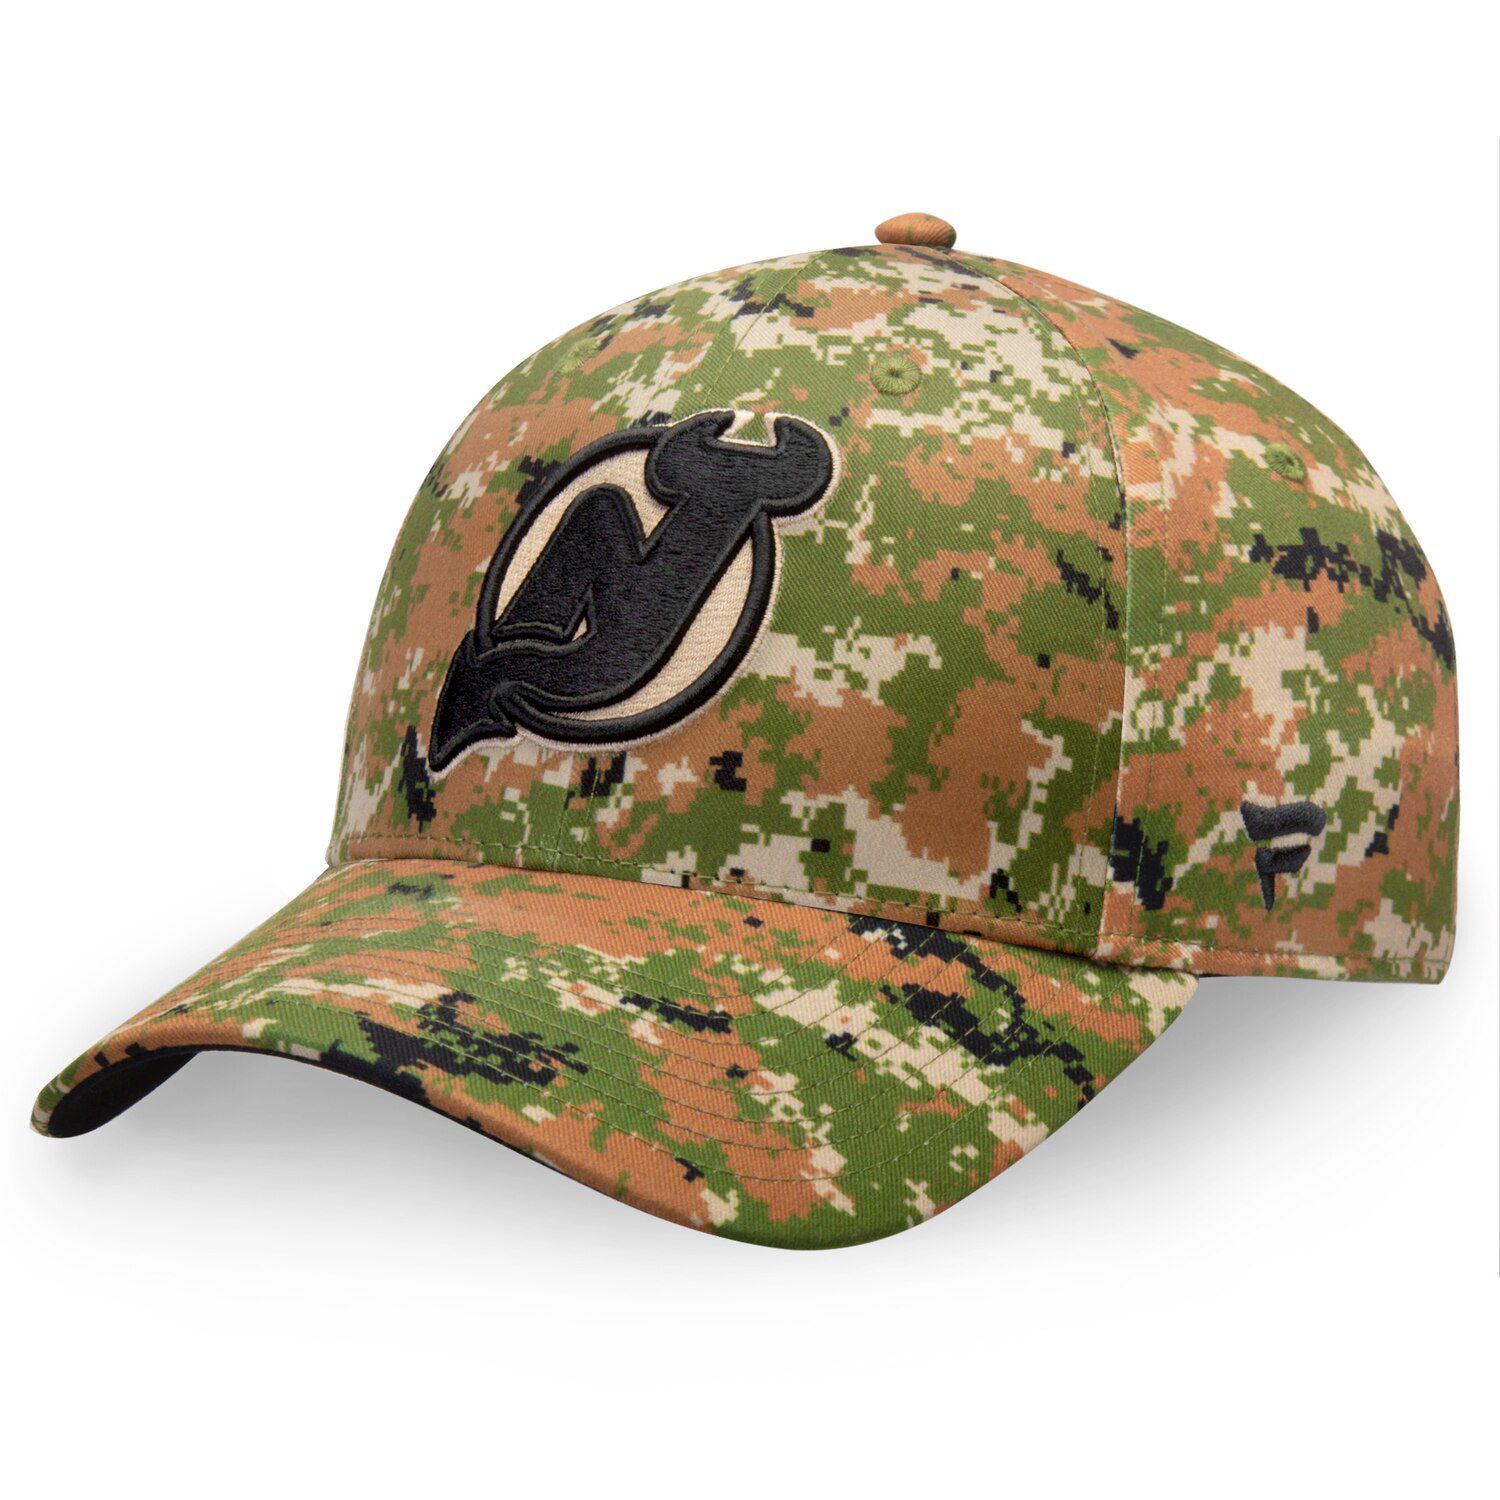 new jersey devils military